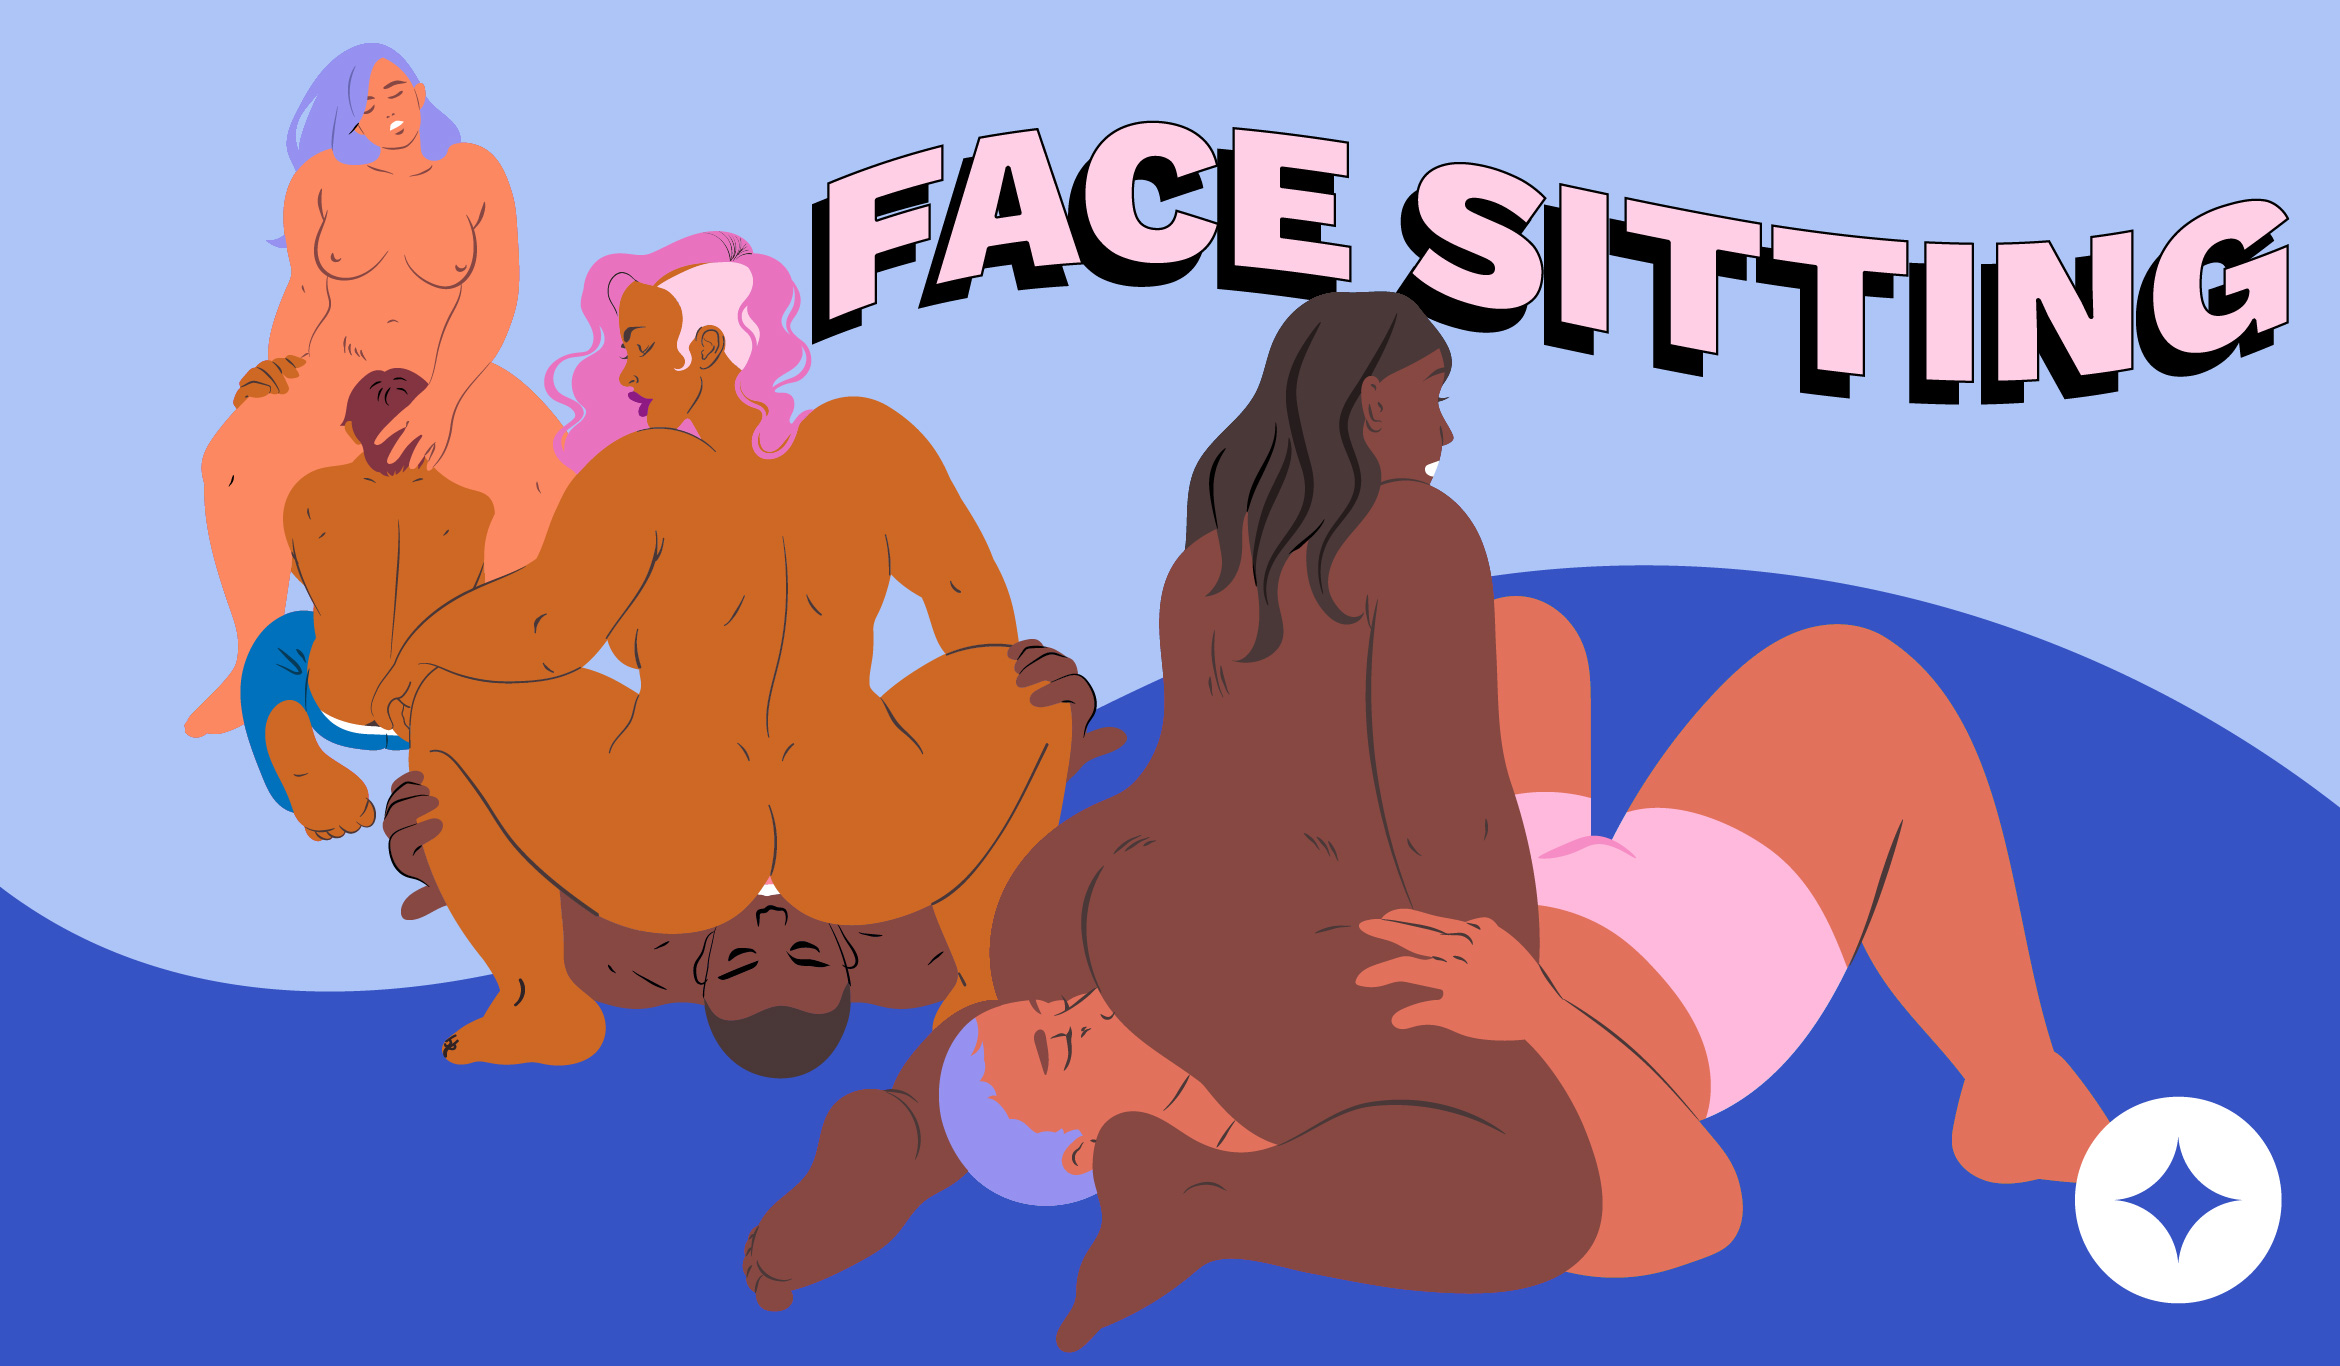 Face Sitting How to Facesitting Guide with Best Positions + Tips! pic